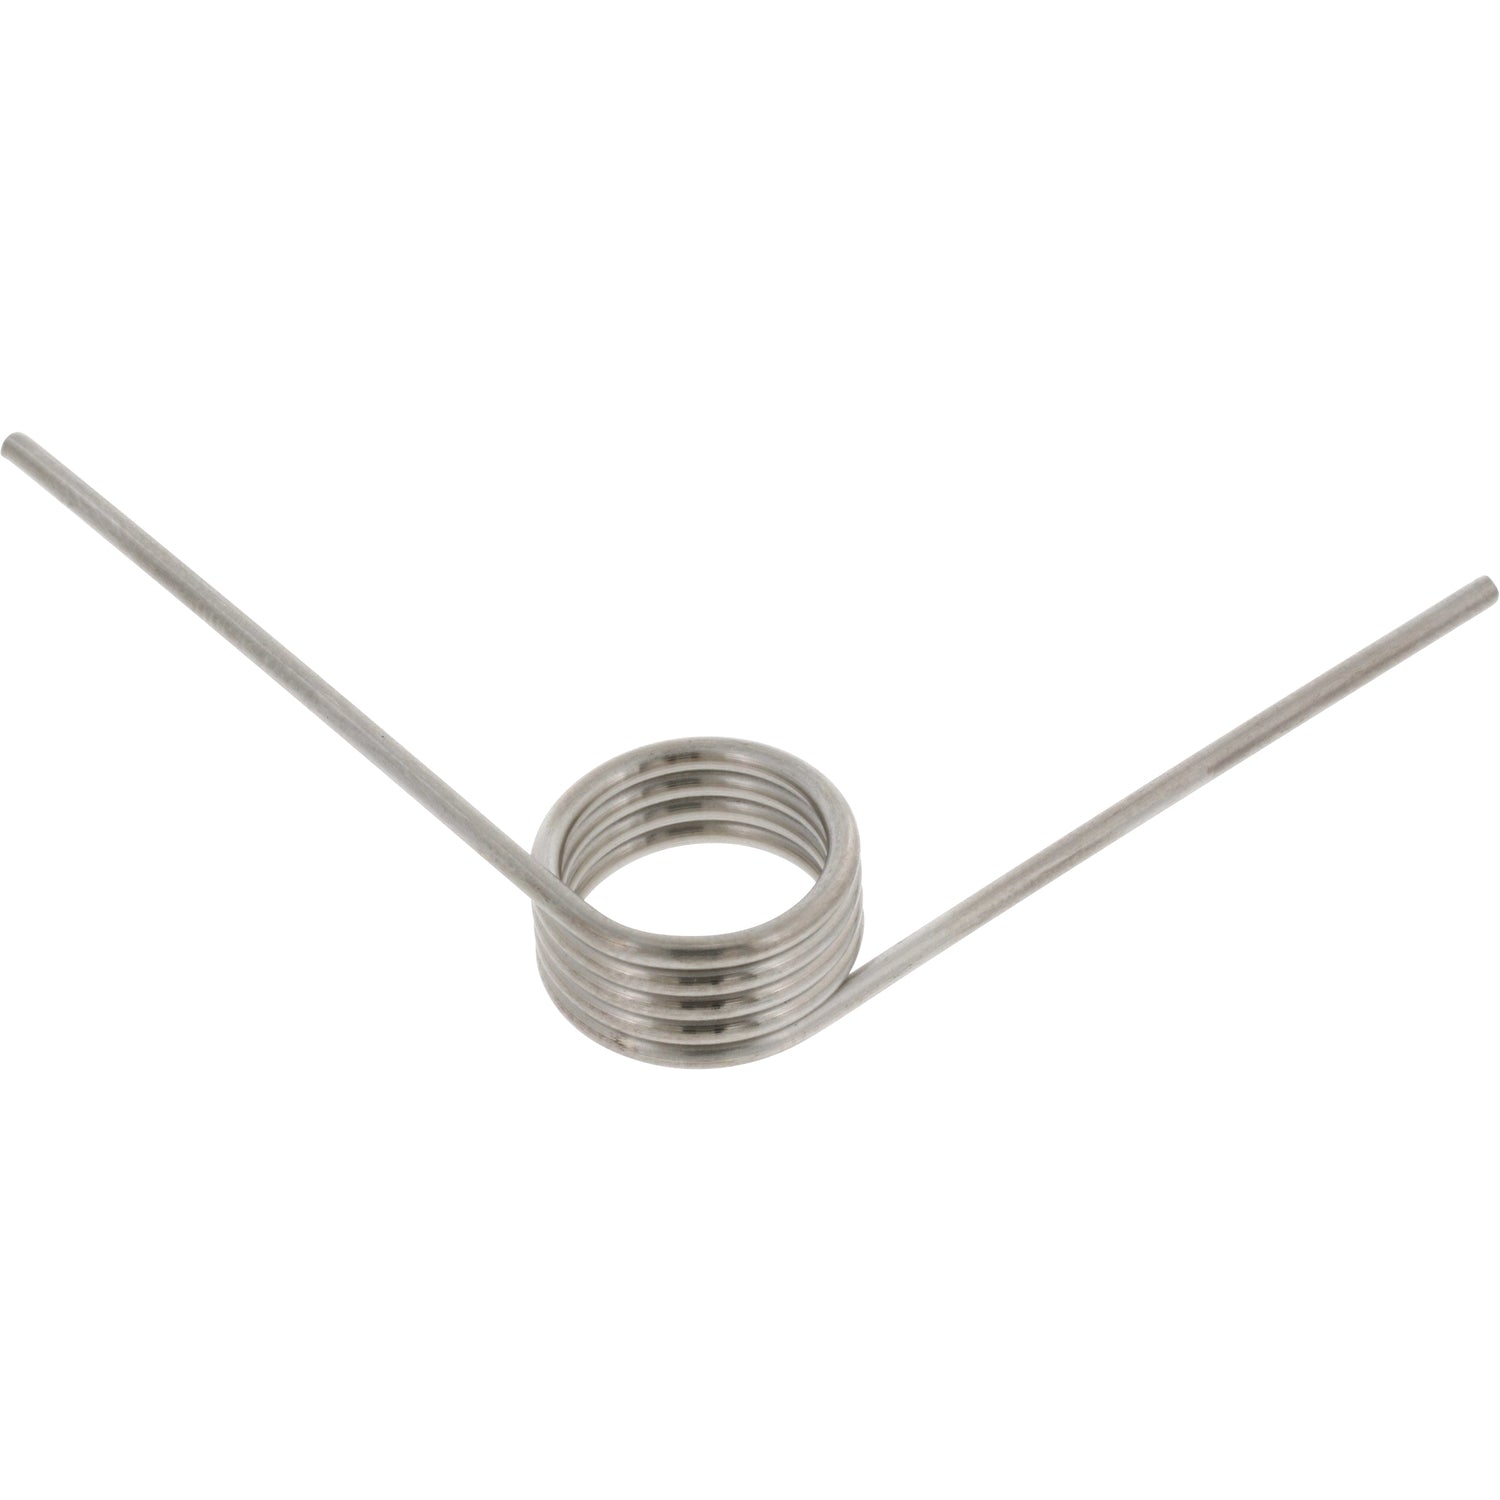 302 stainless steel torsion spring on white back ground. 90 Degree left hand wound. 9287K236